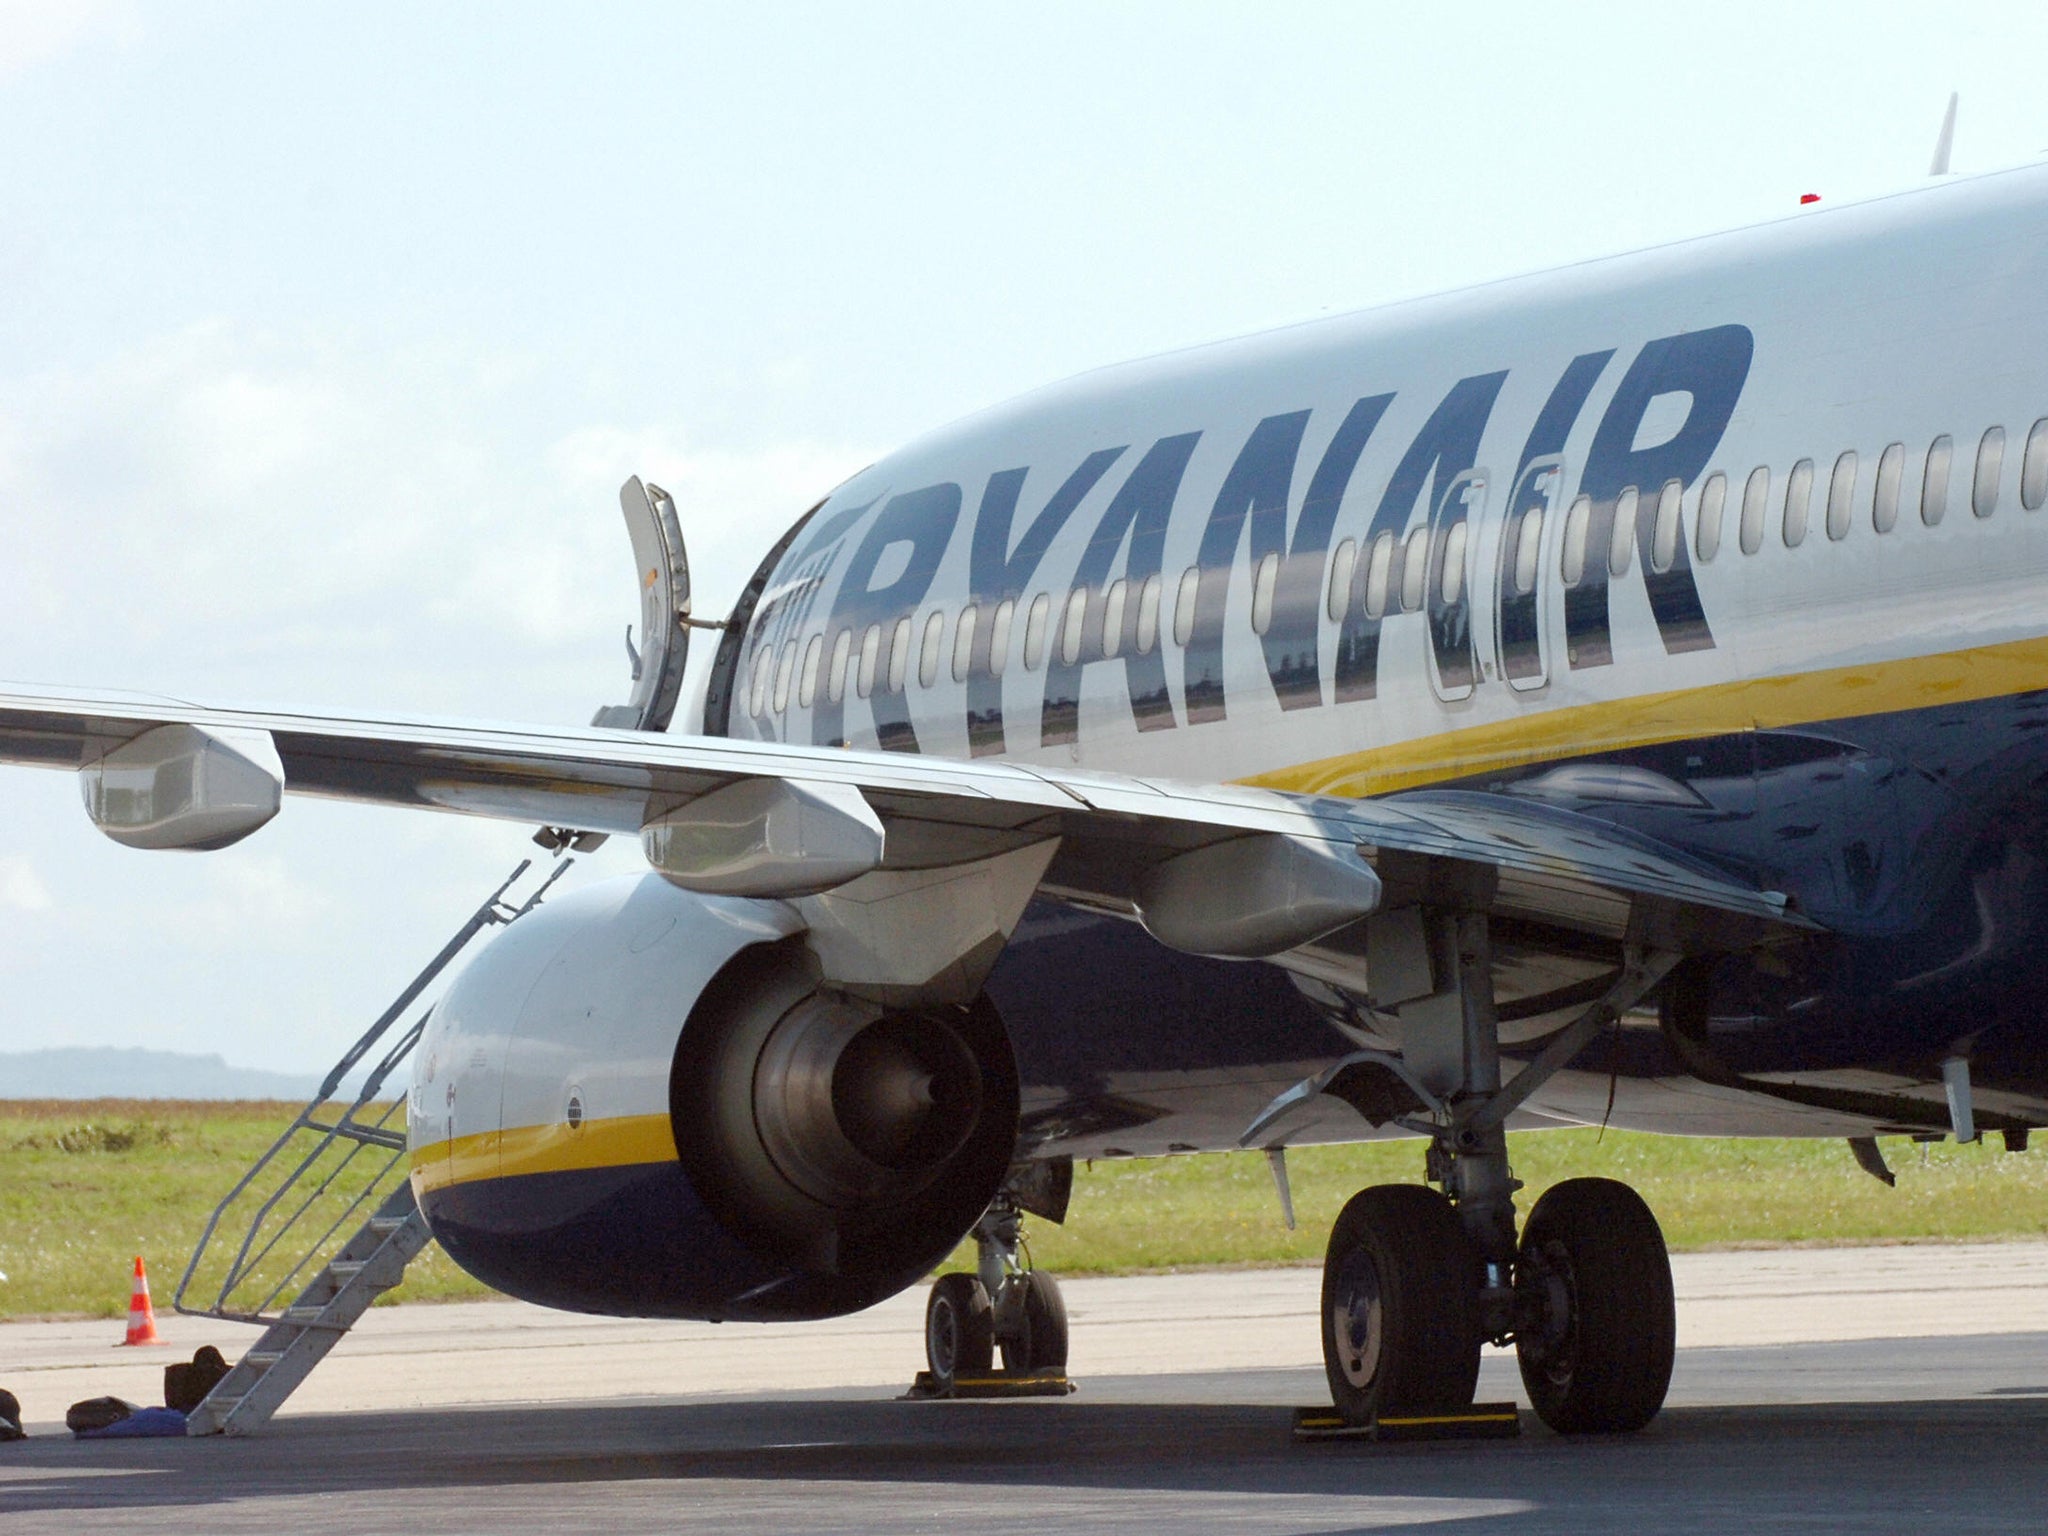 Ryanair announced ambitious expansion plans in Italy after previously threatening to cut back on routes and axe jobs